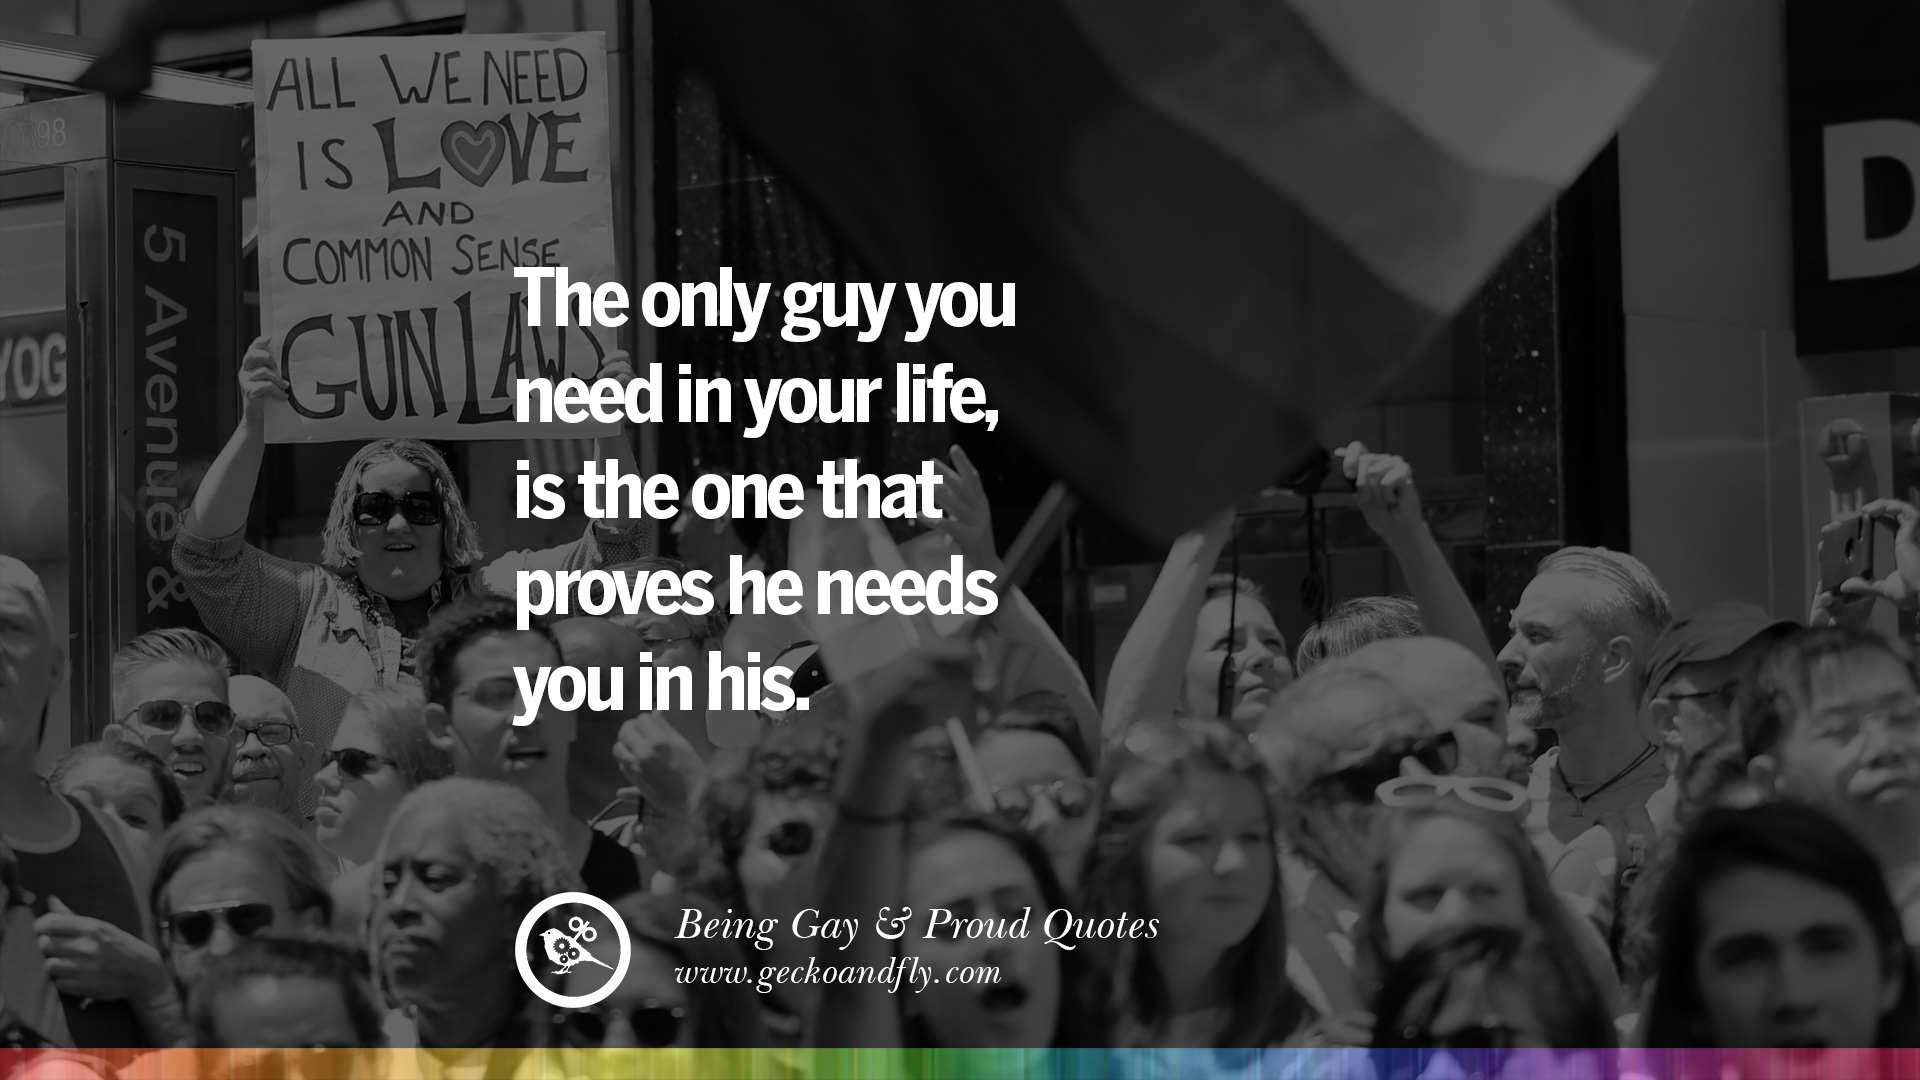 famous pro life quotes 35 quotes about pride pro lgbt homophobia and marriage